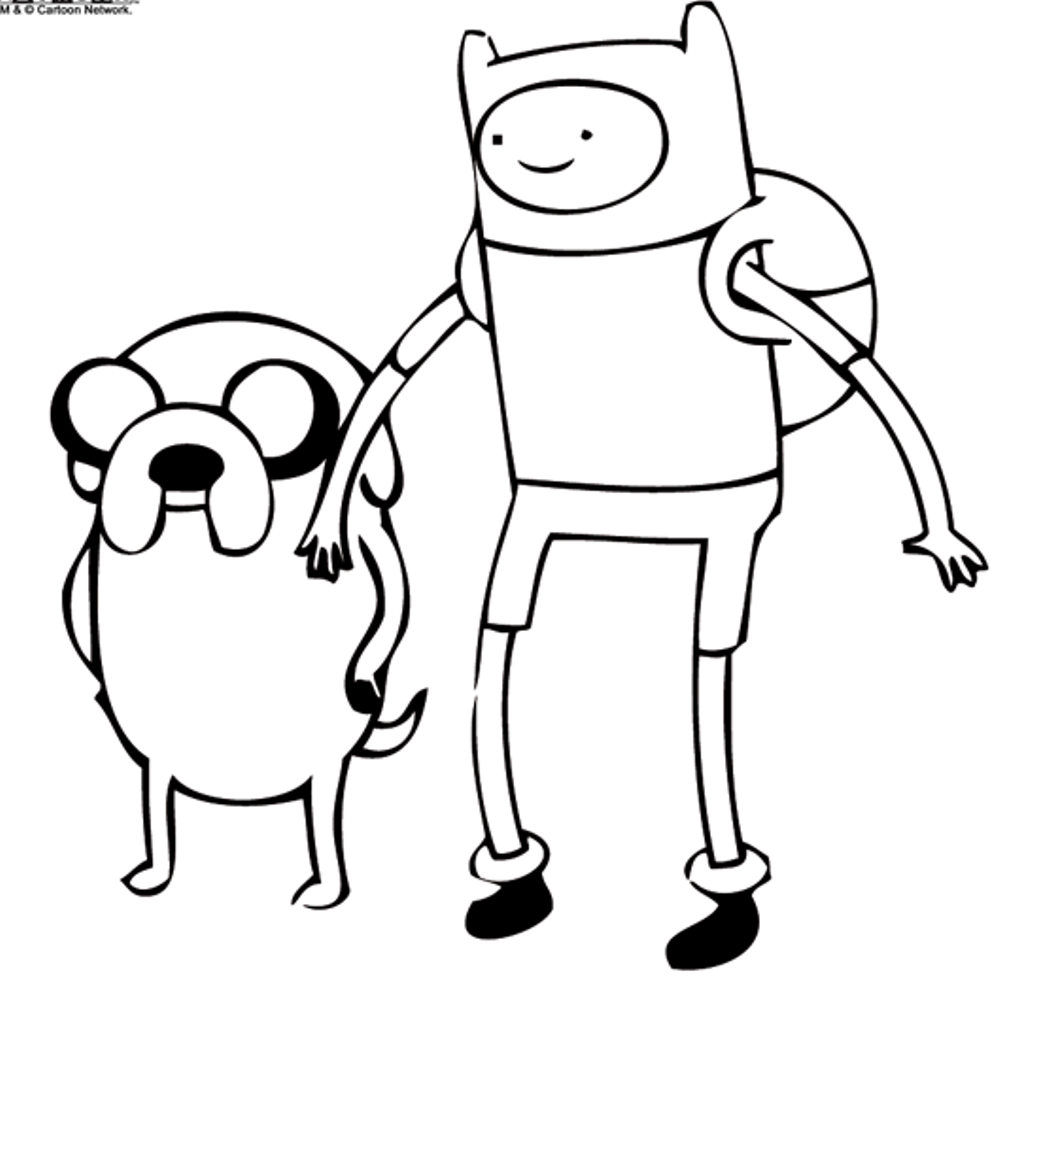 Adventure Time Coloring Pages Free Cartoon | Cartoon Coloring ...